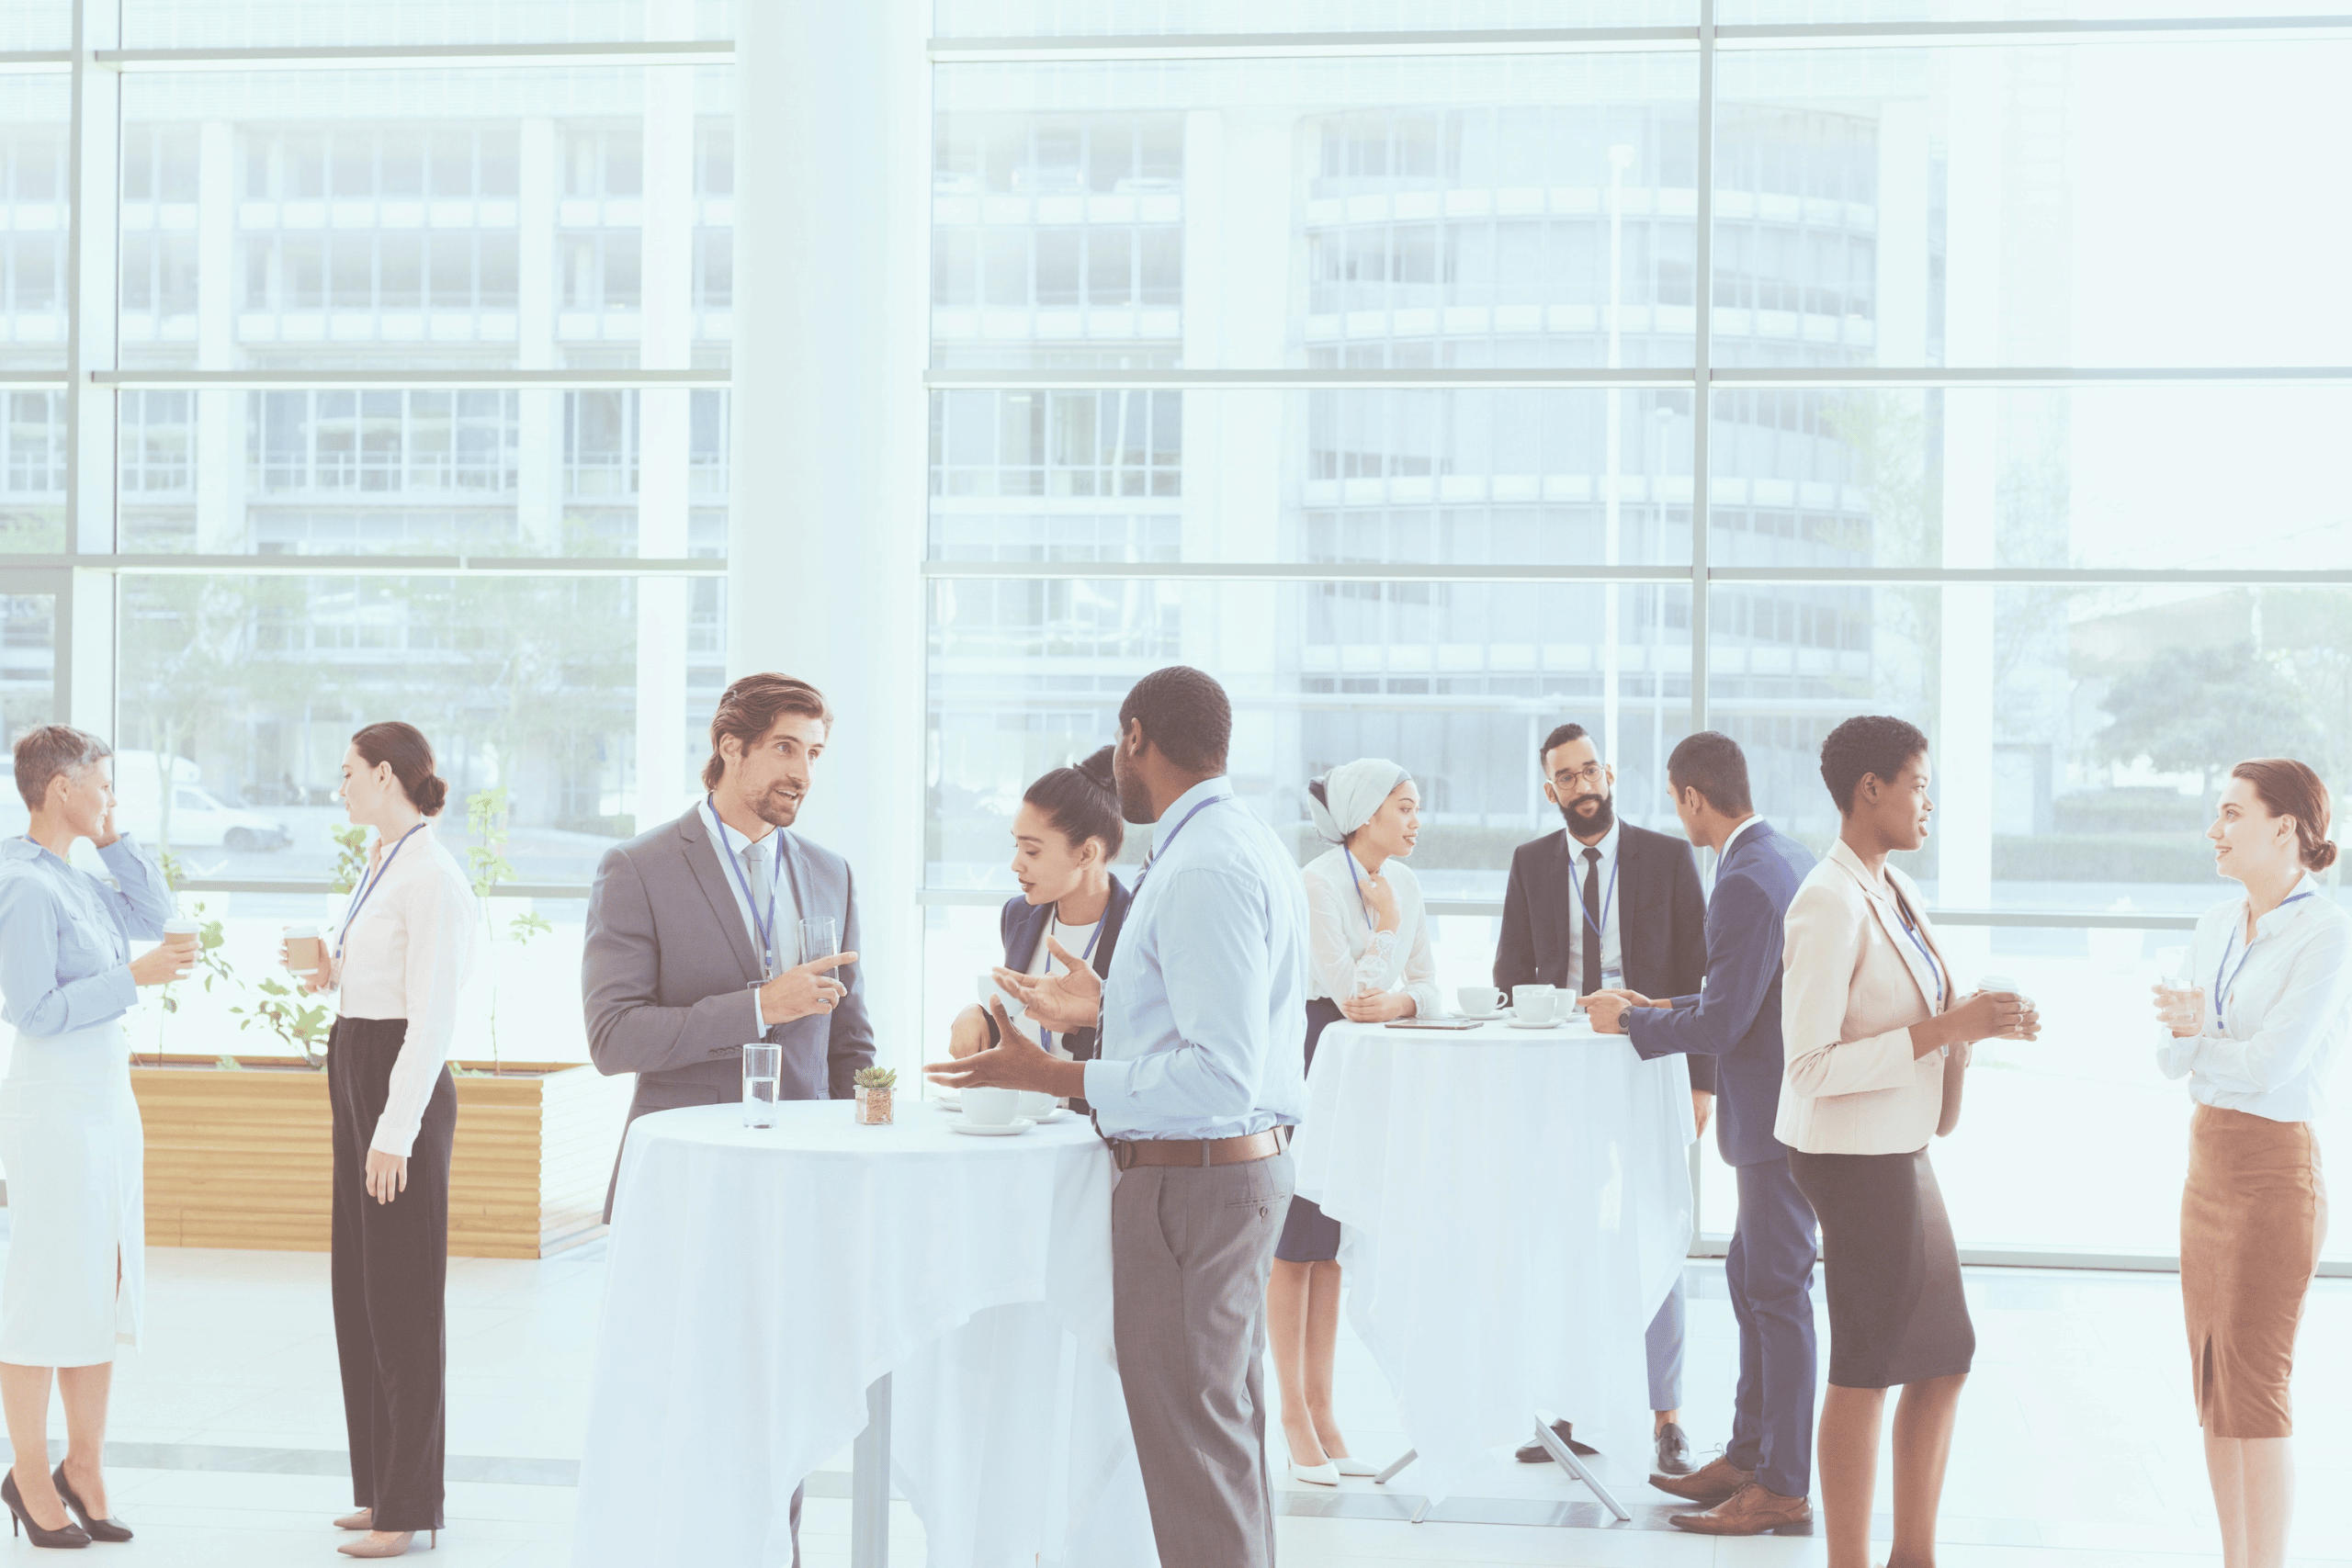 Business people at a networking event